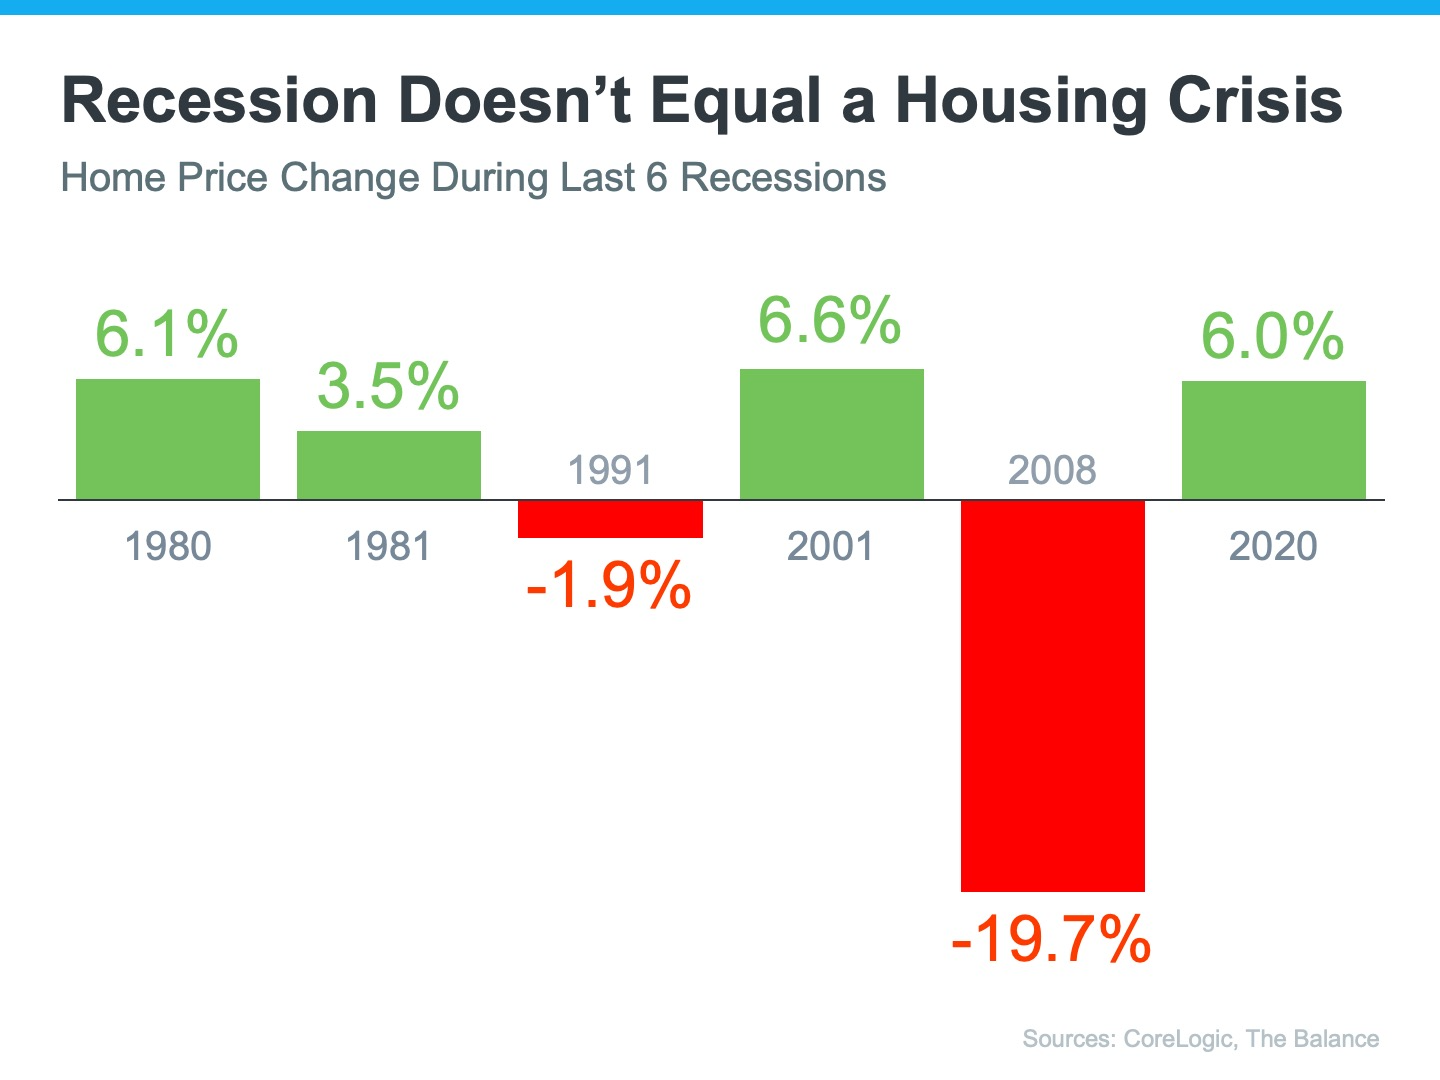 Recession Doesn't Equal Housing Crisis